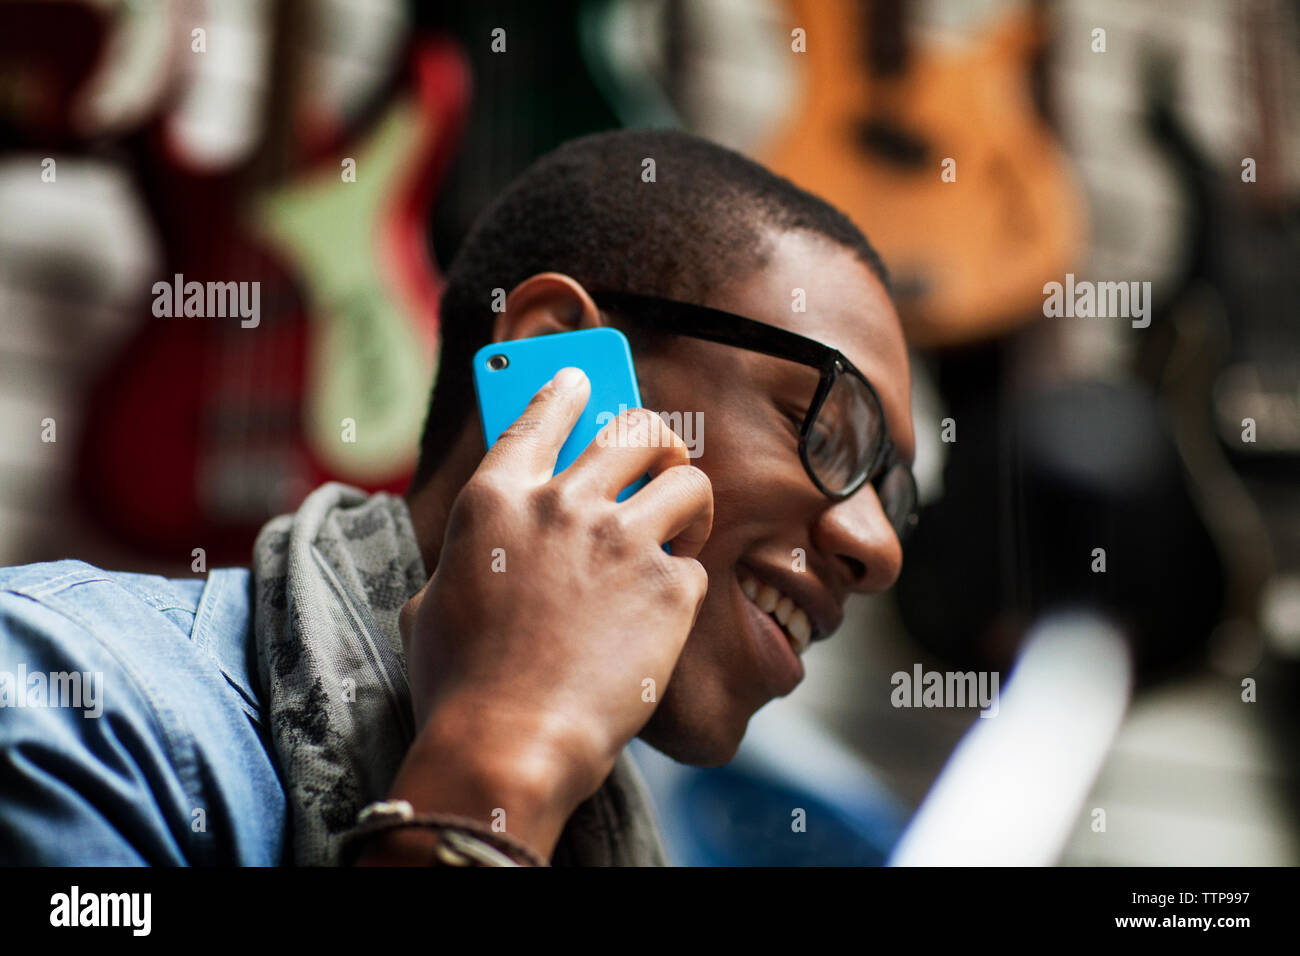 Happy man talking on mobile phone Banque D'Images